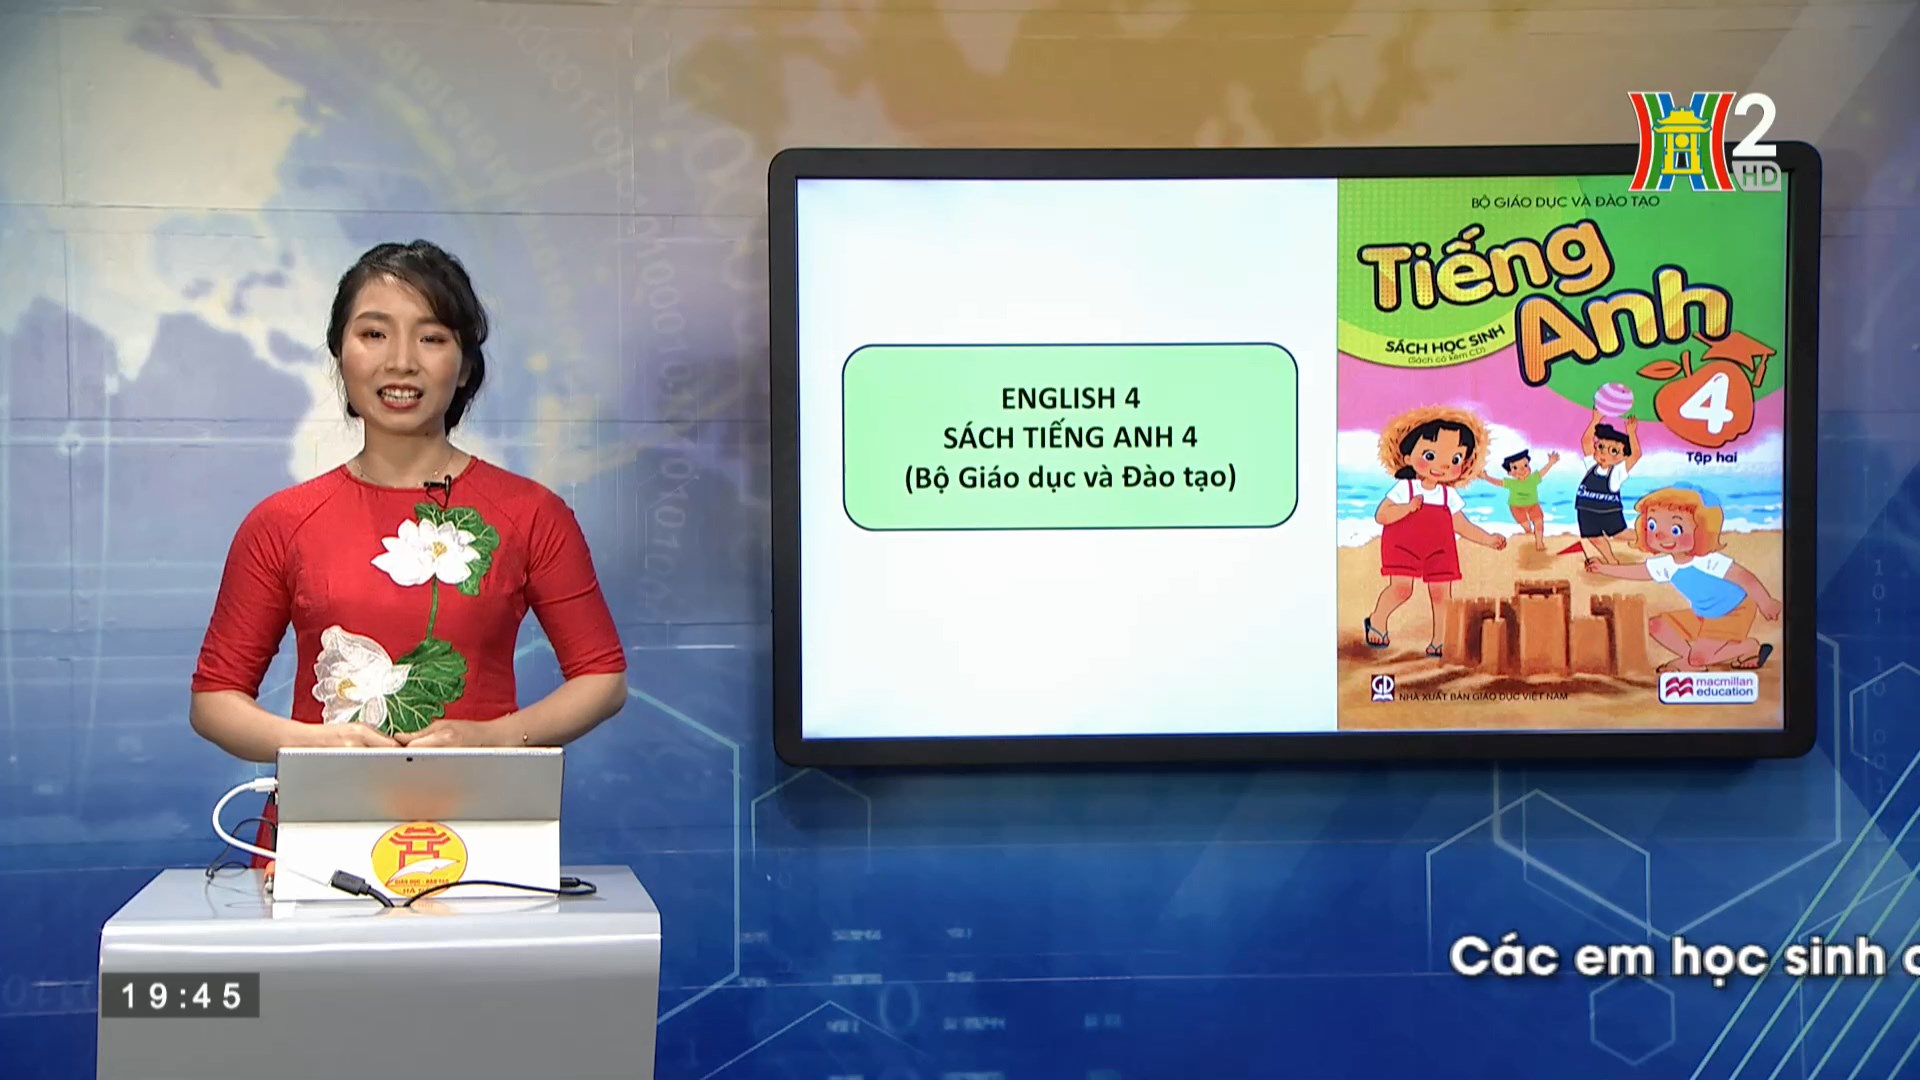 Tiếng Anh Lớp 4. Unit 19: What animal do you want to see? - Lesson 3 (19h45 ngày 20/06/2020)